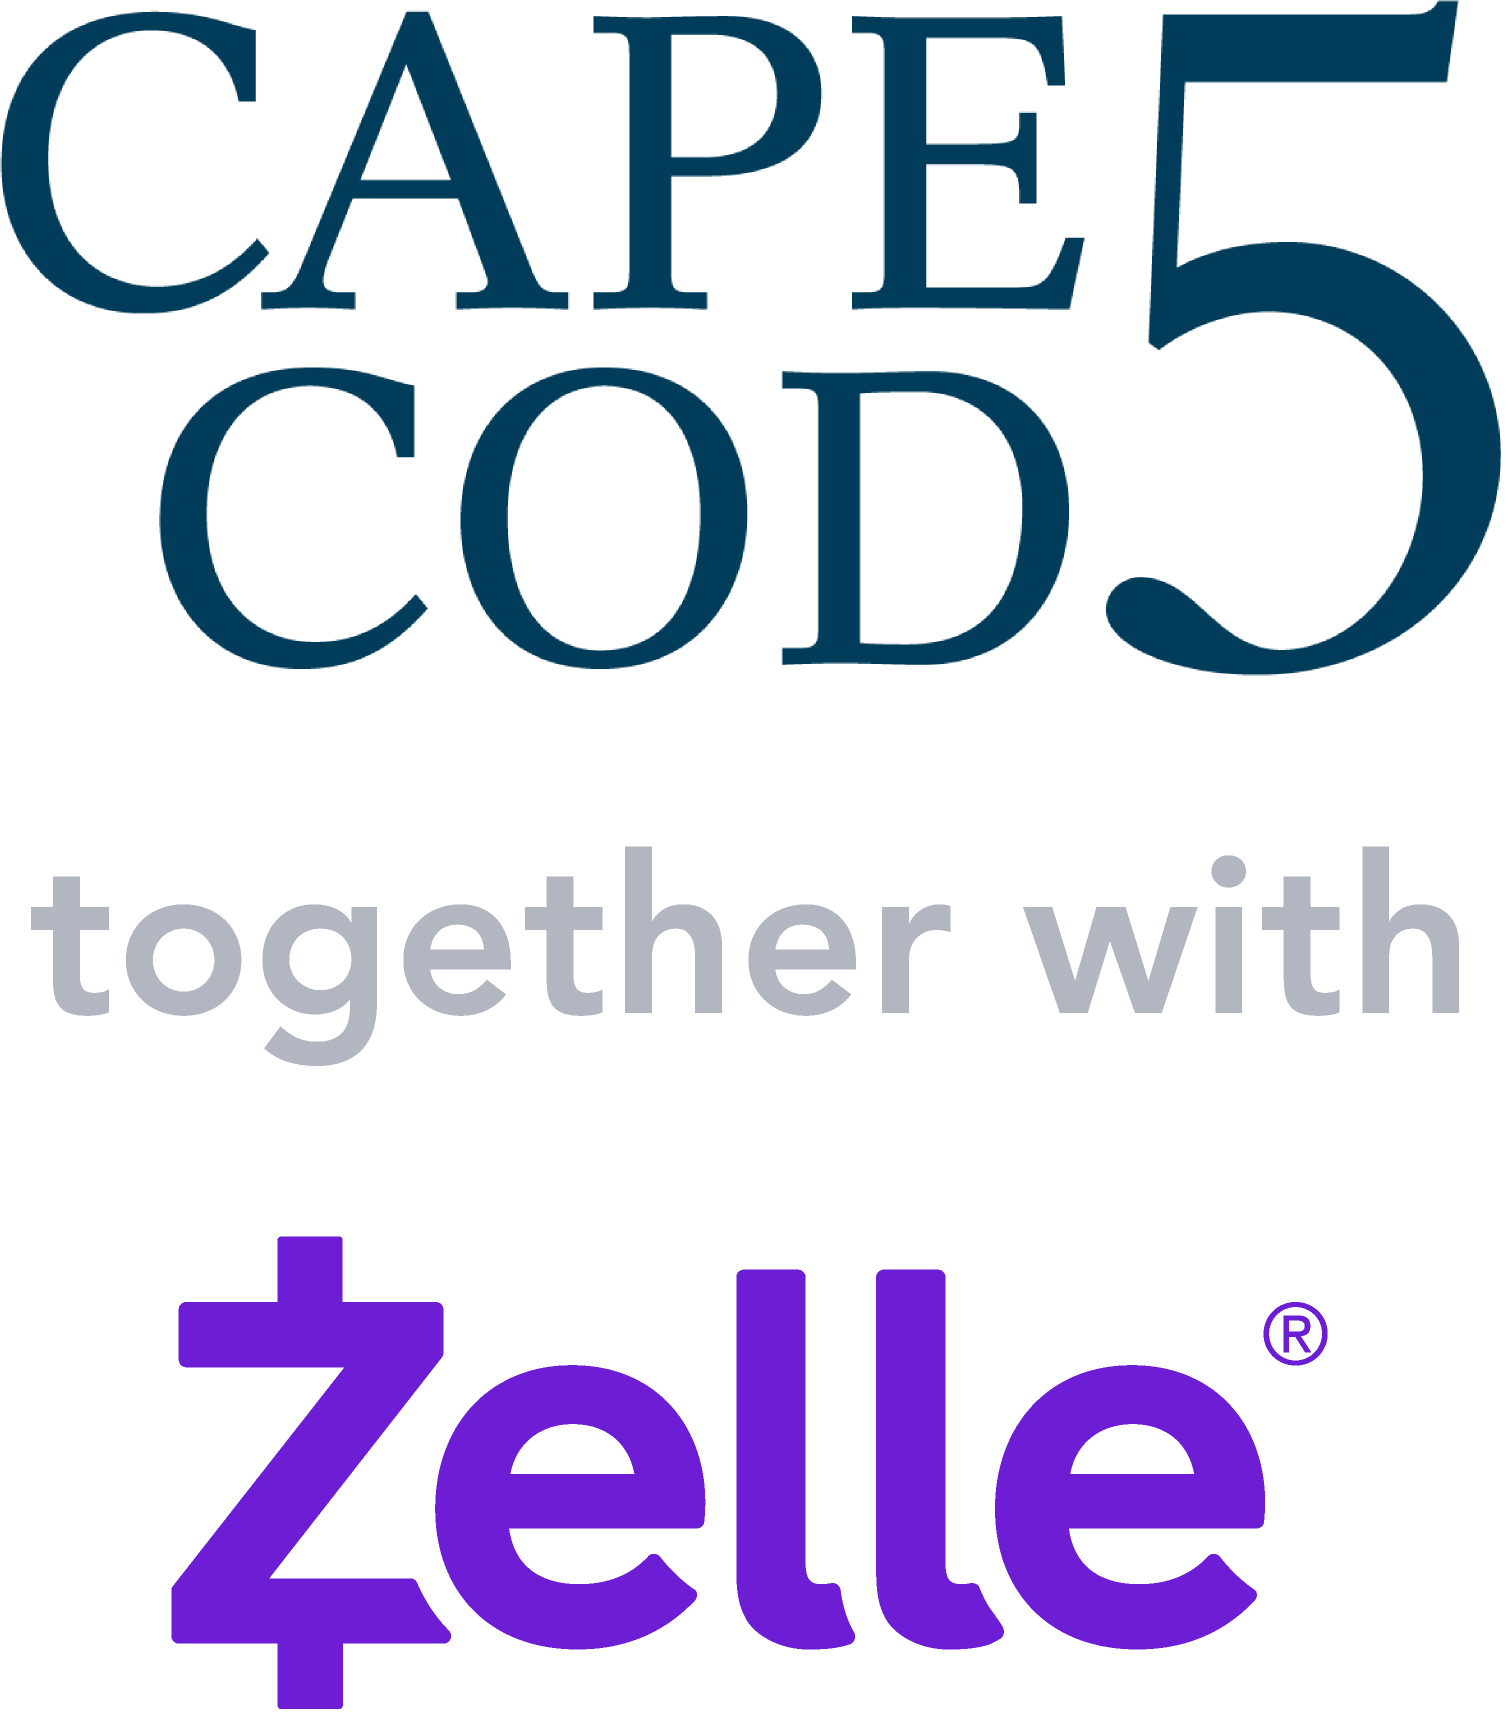 Cape Cod 5 and Zelle logo